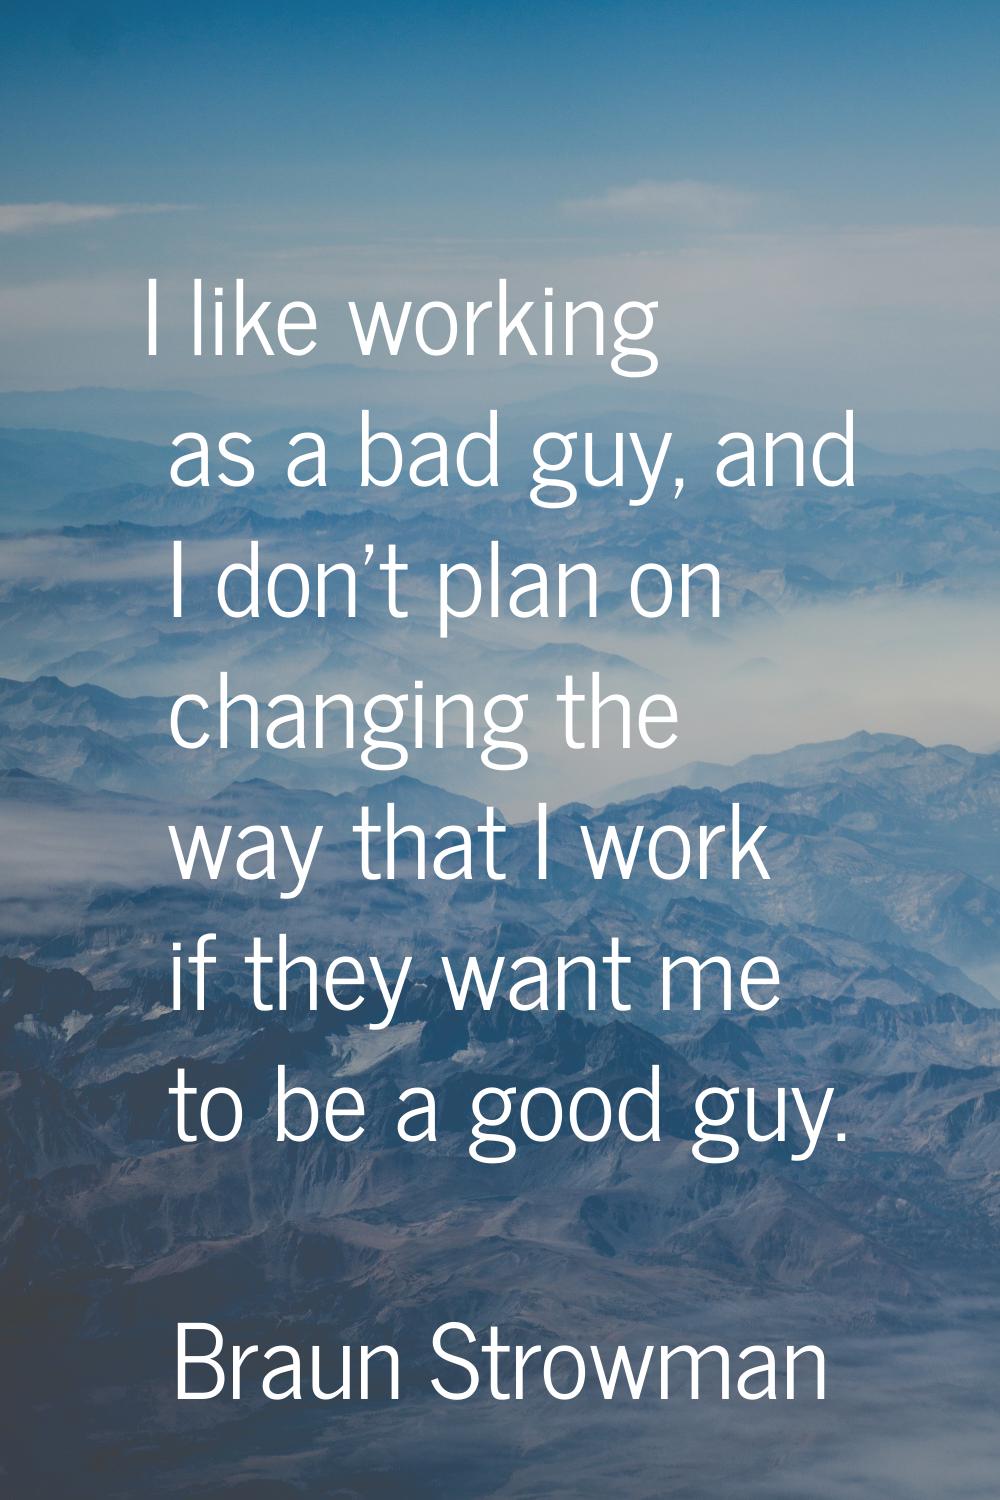 I like working as a bad guy, and I don't plan on changing the way that I work if they want me to be